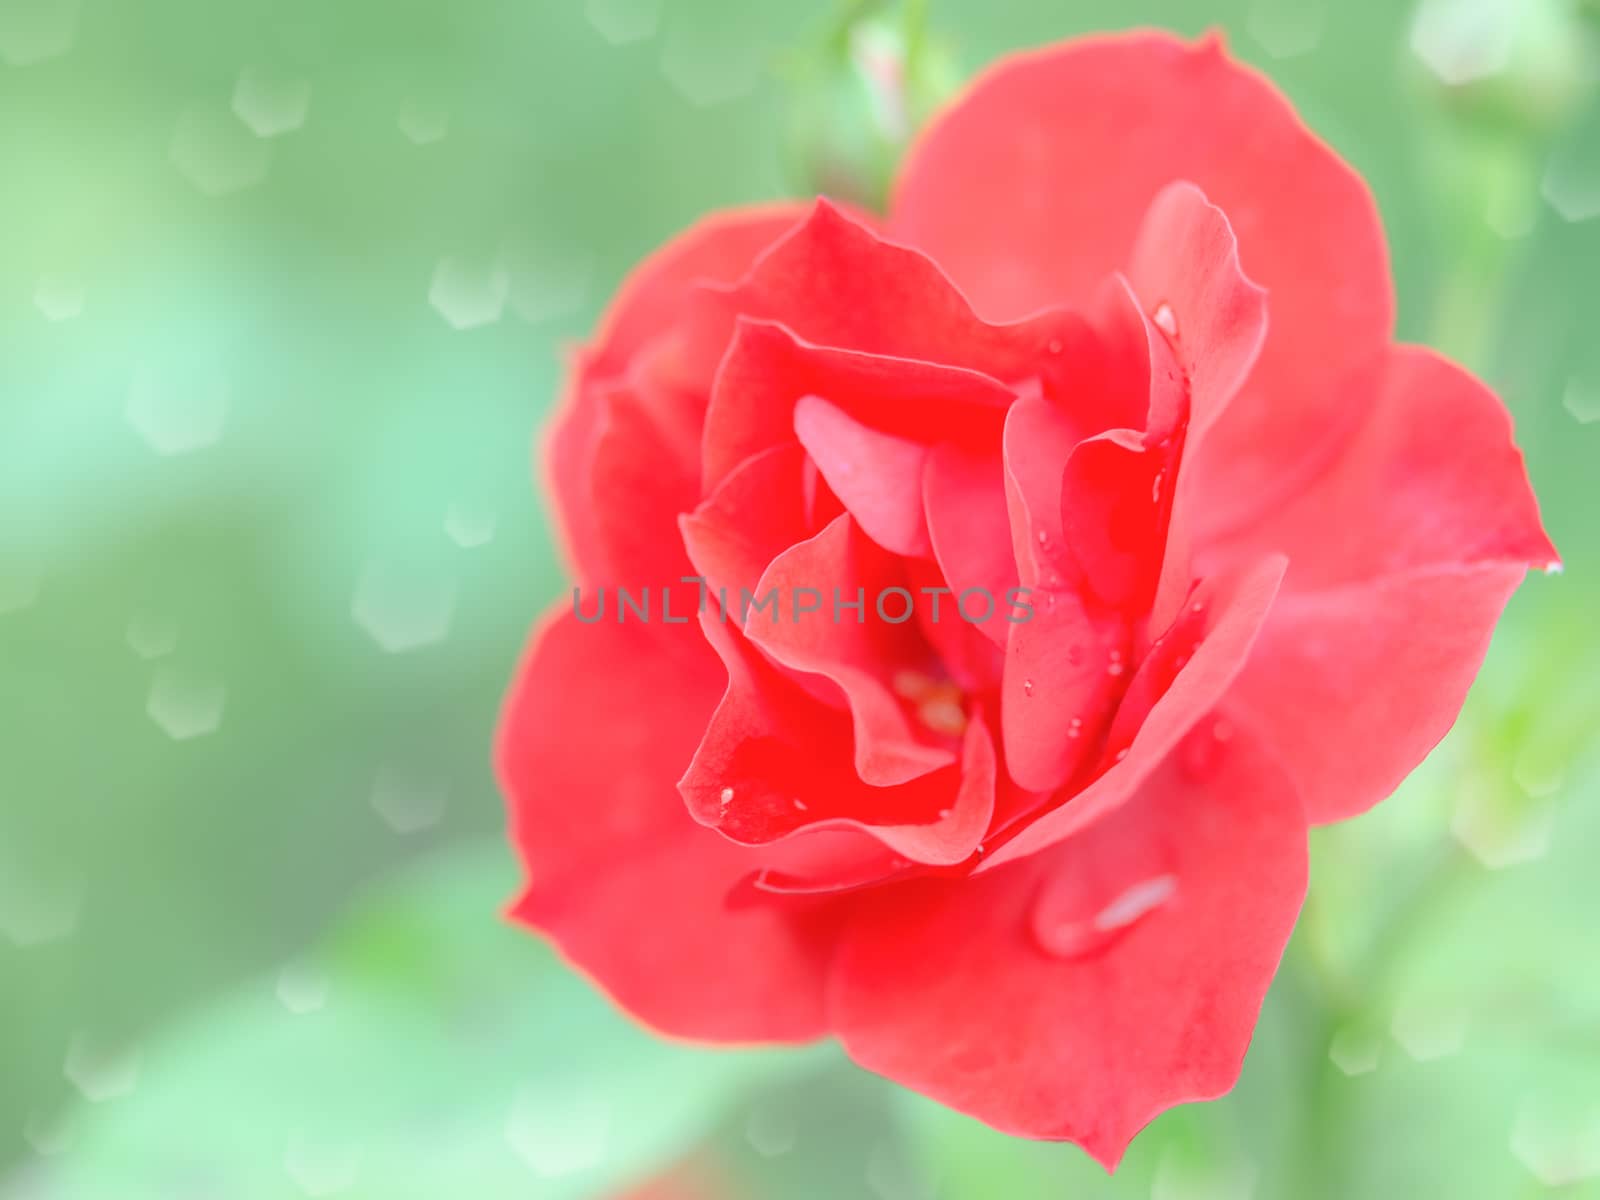 Wet tender red rose flower with rain drops. Stock photo with selective soft focus shallow DOF and blurred bokeh background